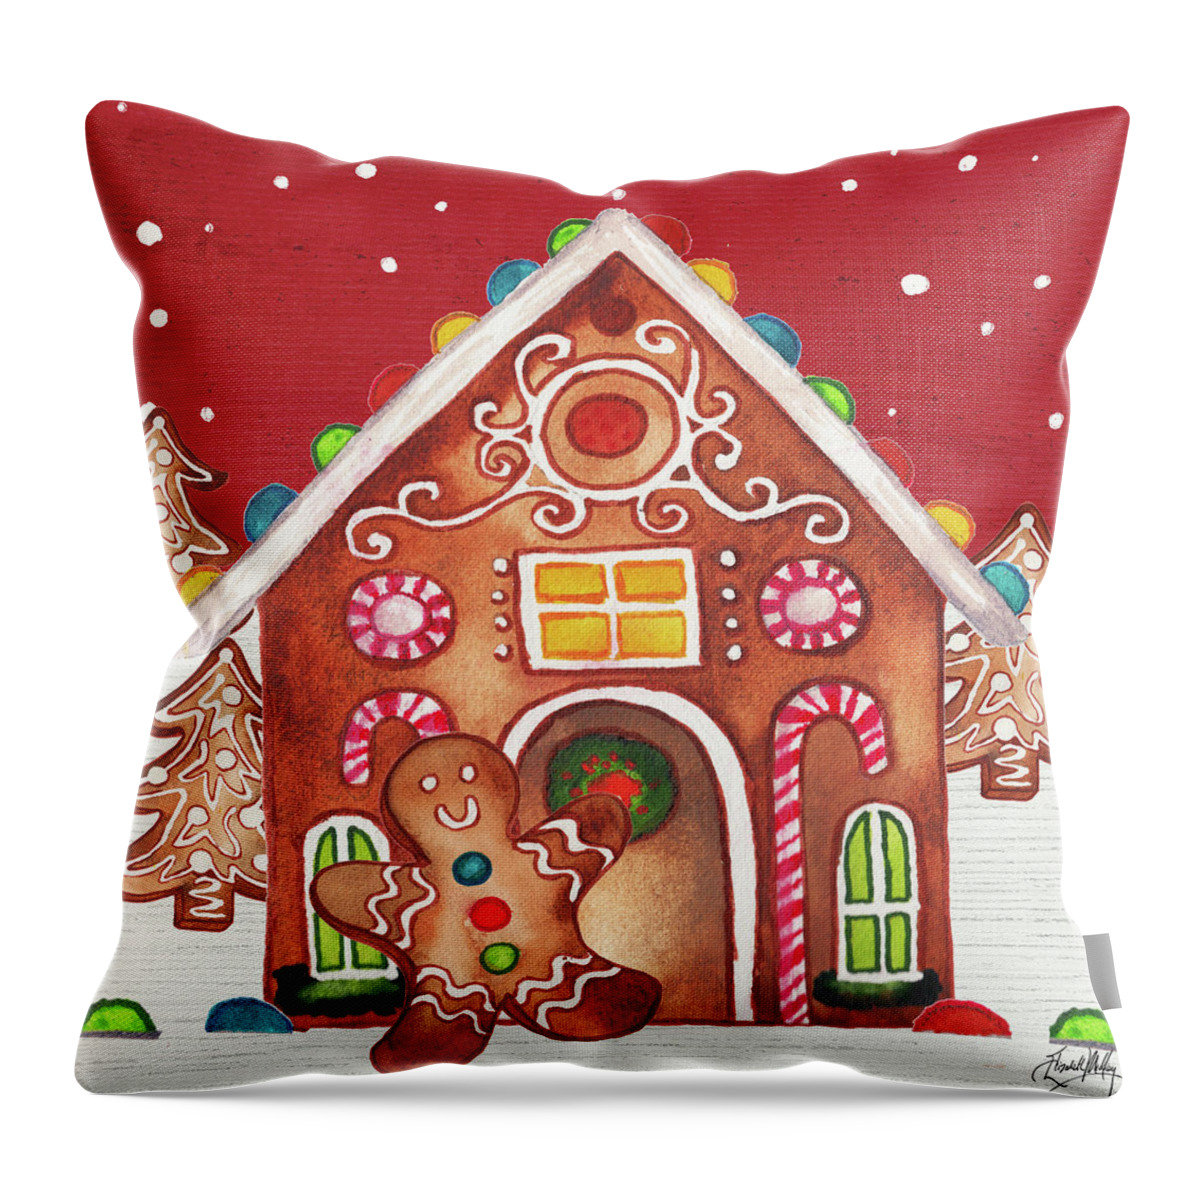 Gingerbread Throw Pillow featuring the mixed media Joyful Gingerbread Village I by Elizabeth Medley